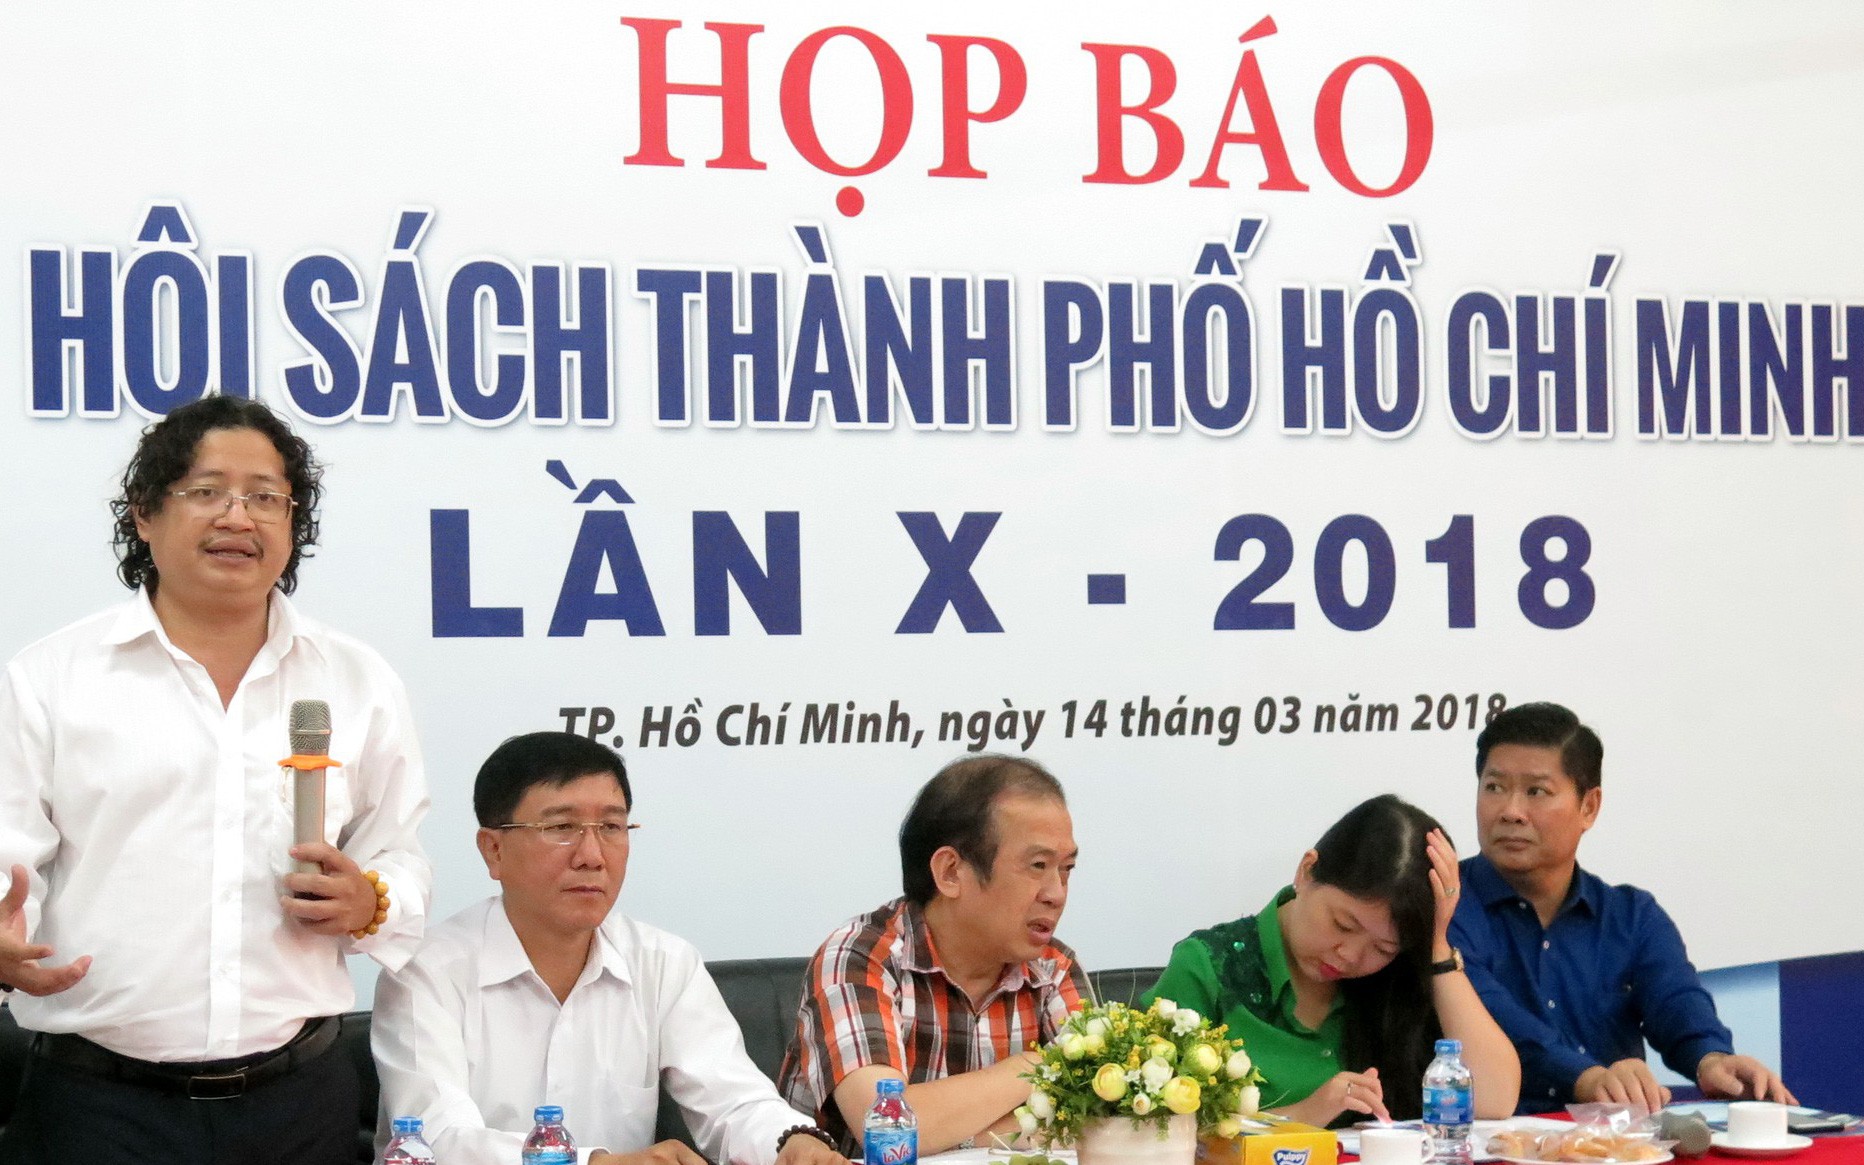 Nguyen Minh Nhut (L), director of Tre Publishing House, speaks at a press conference announcing the 2018 Ho Chi Minh City Book Fair on March 14, 2018. Photo: Tuoi Tre